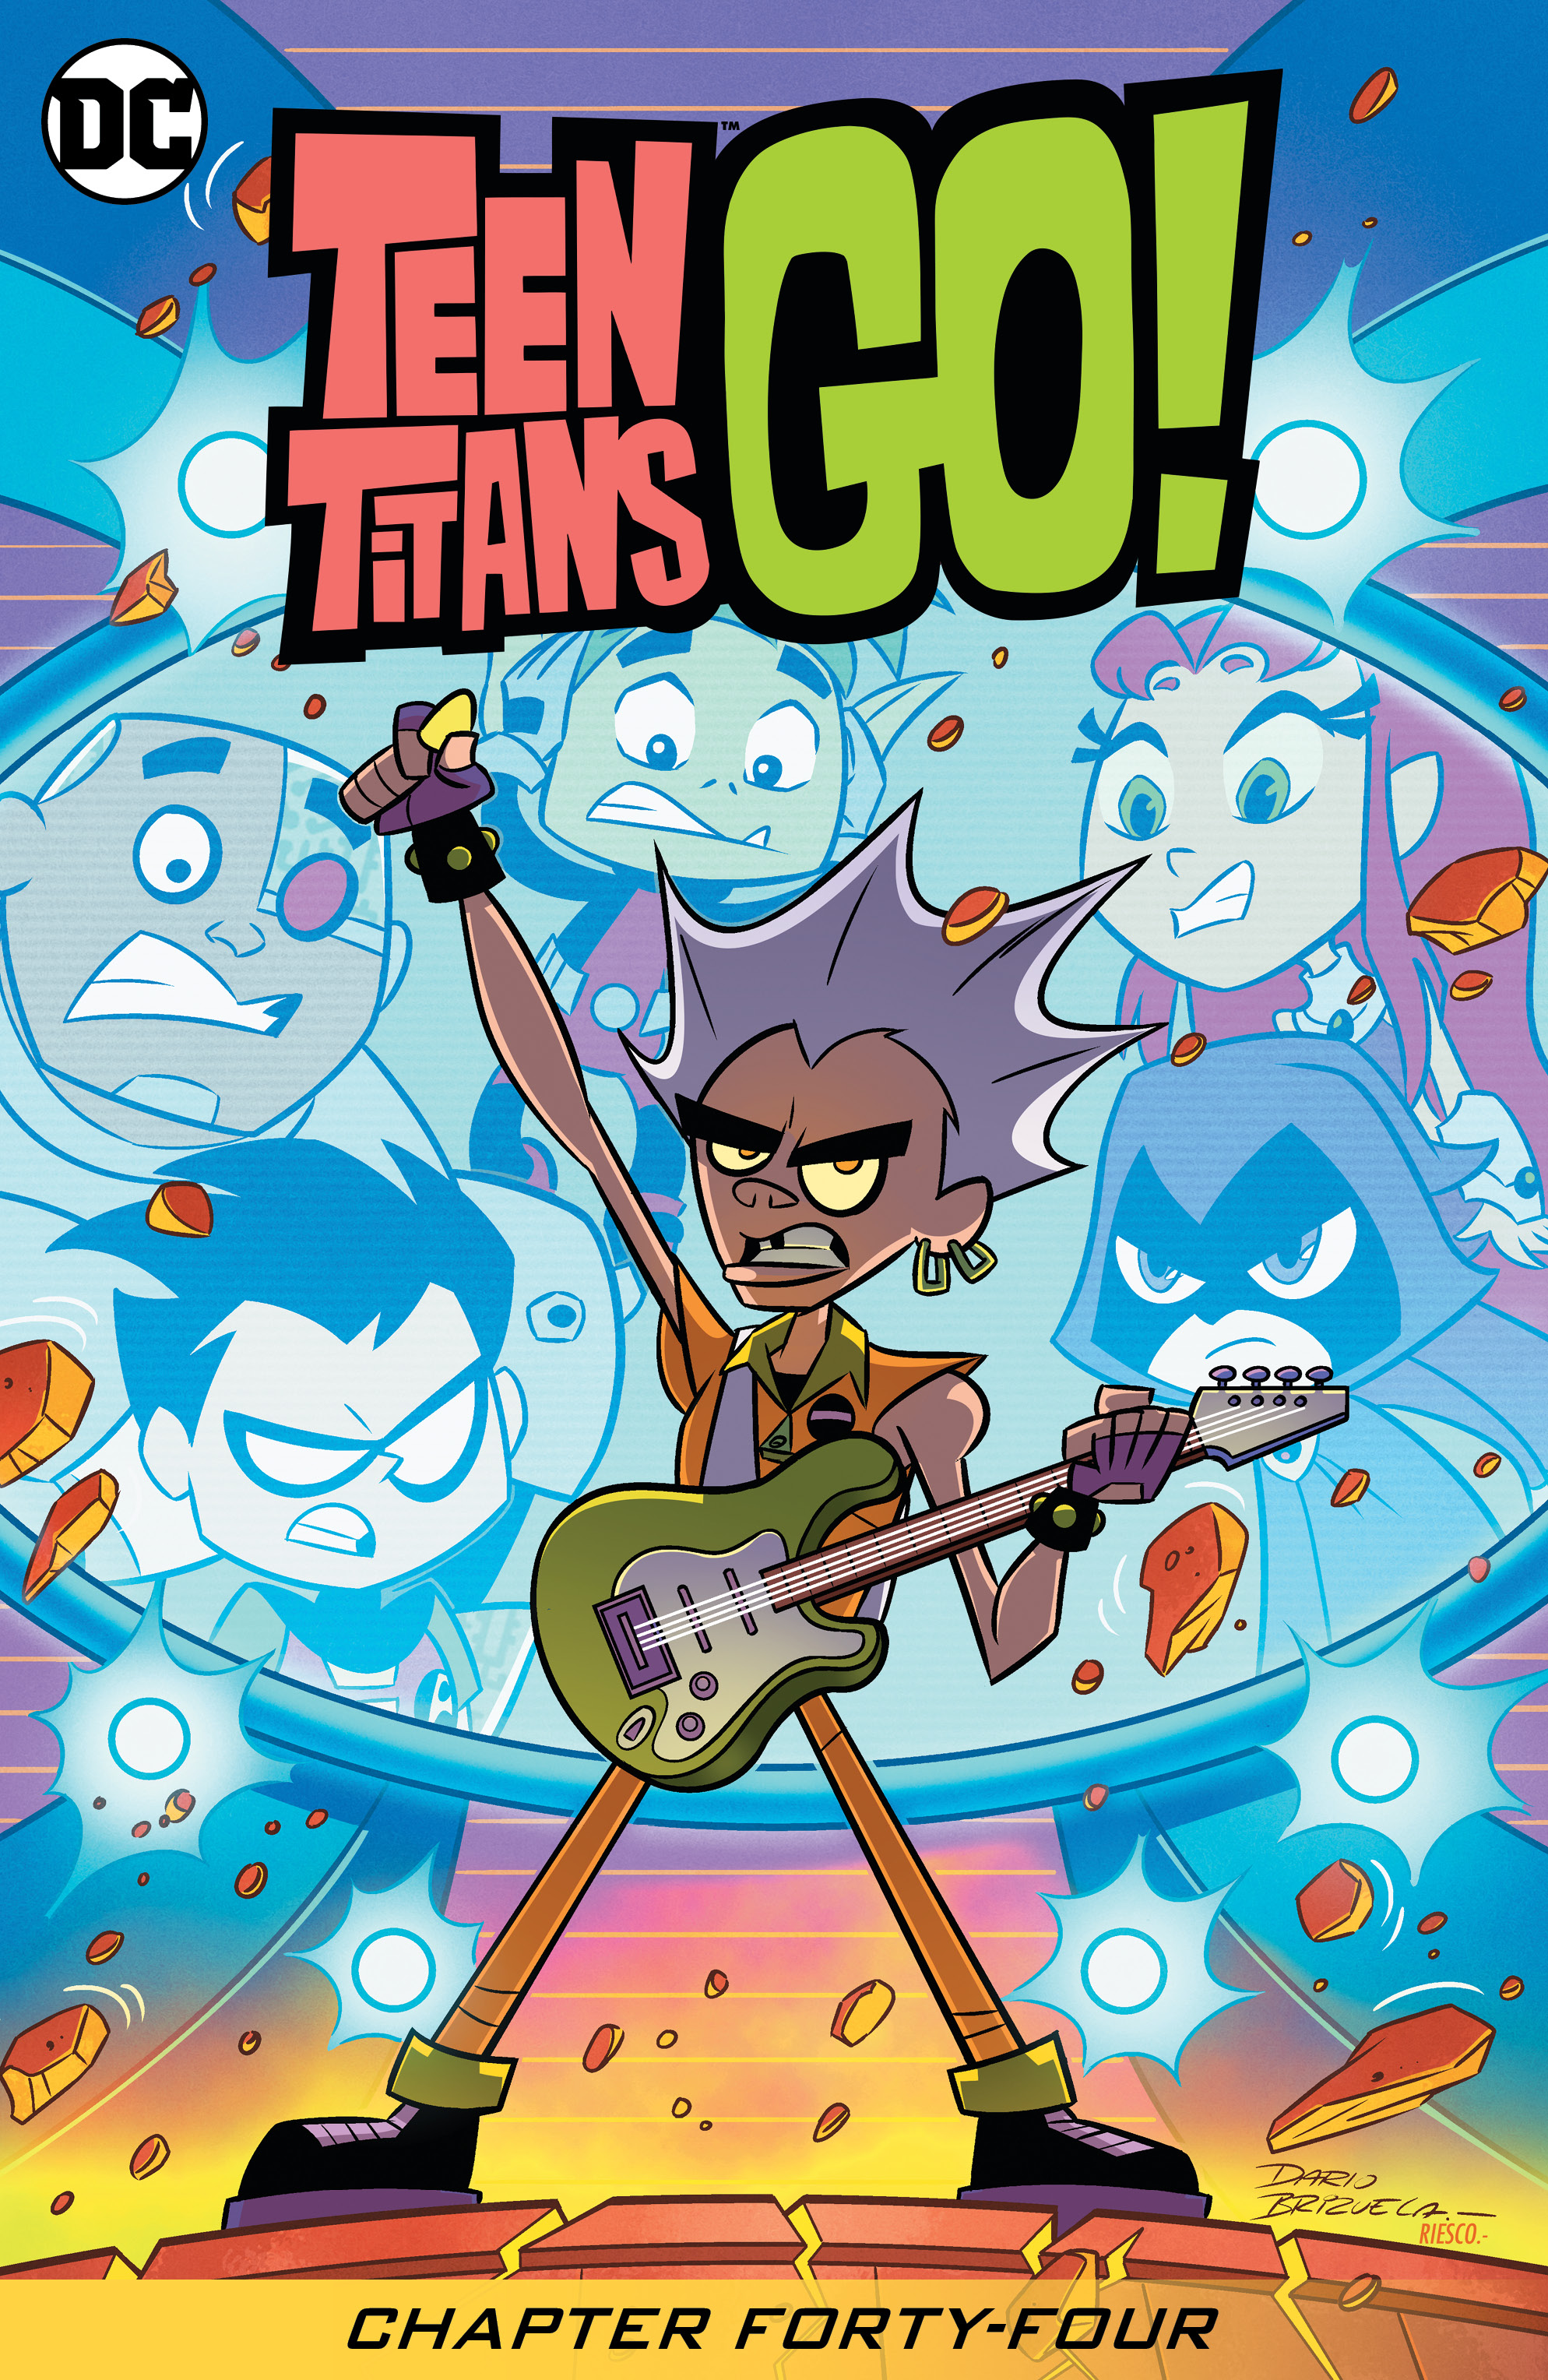 Teen Titans Go! (2013-) #44 preview images